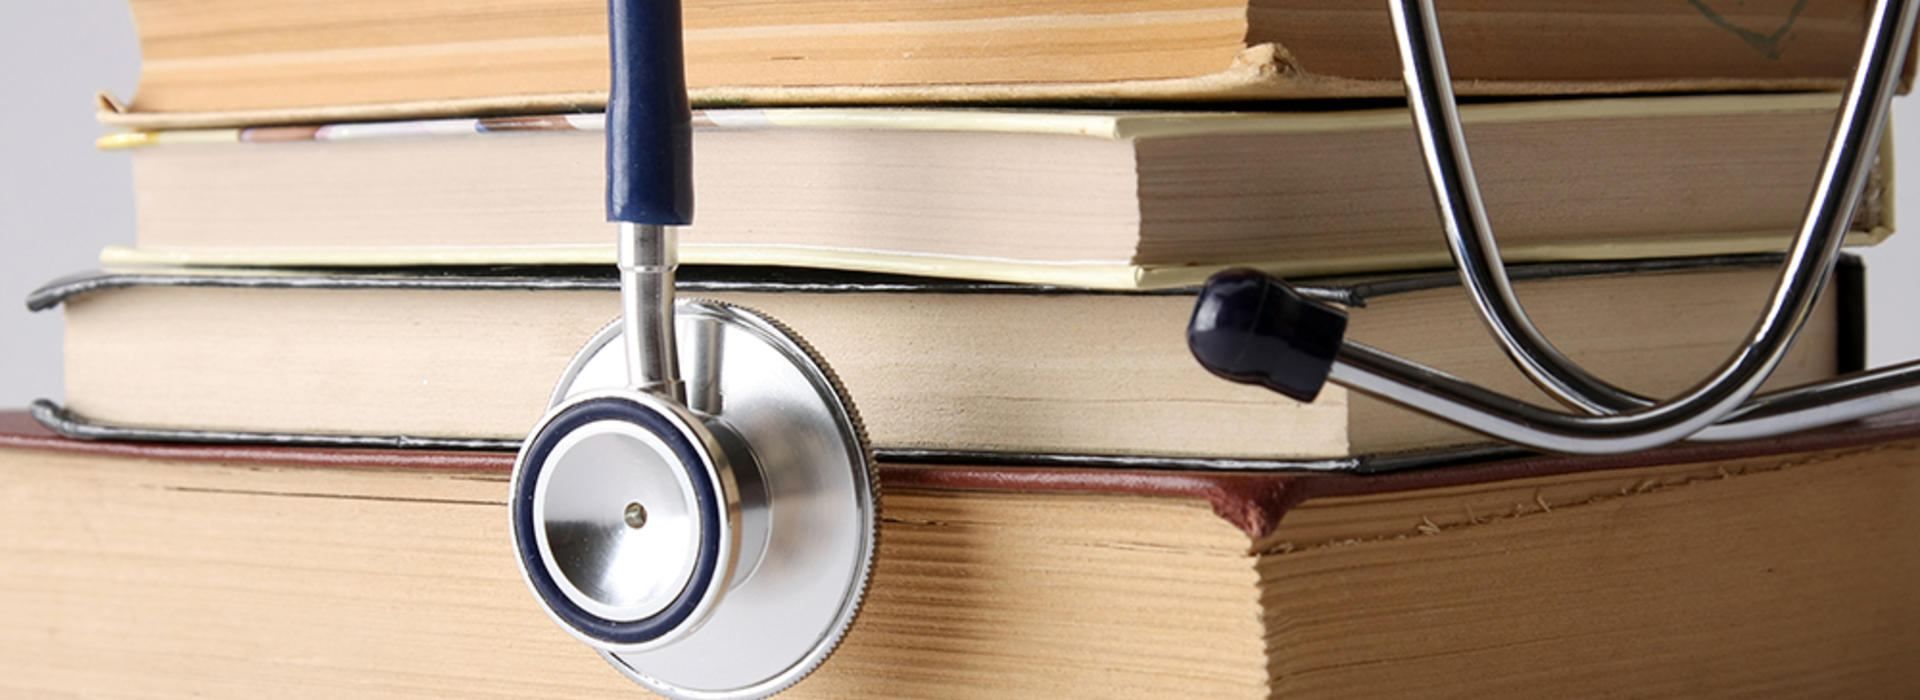 A stack of books with a stethoscope hanging over top of them.